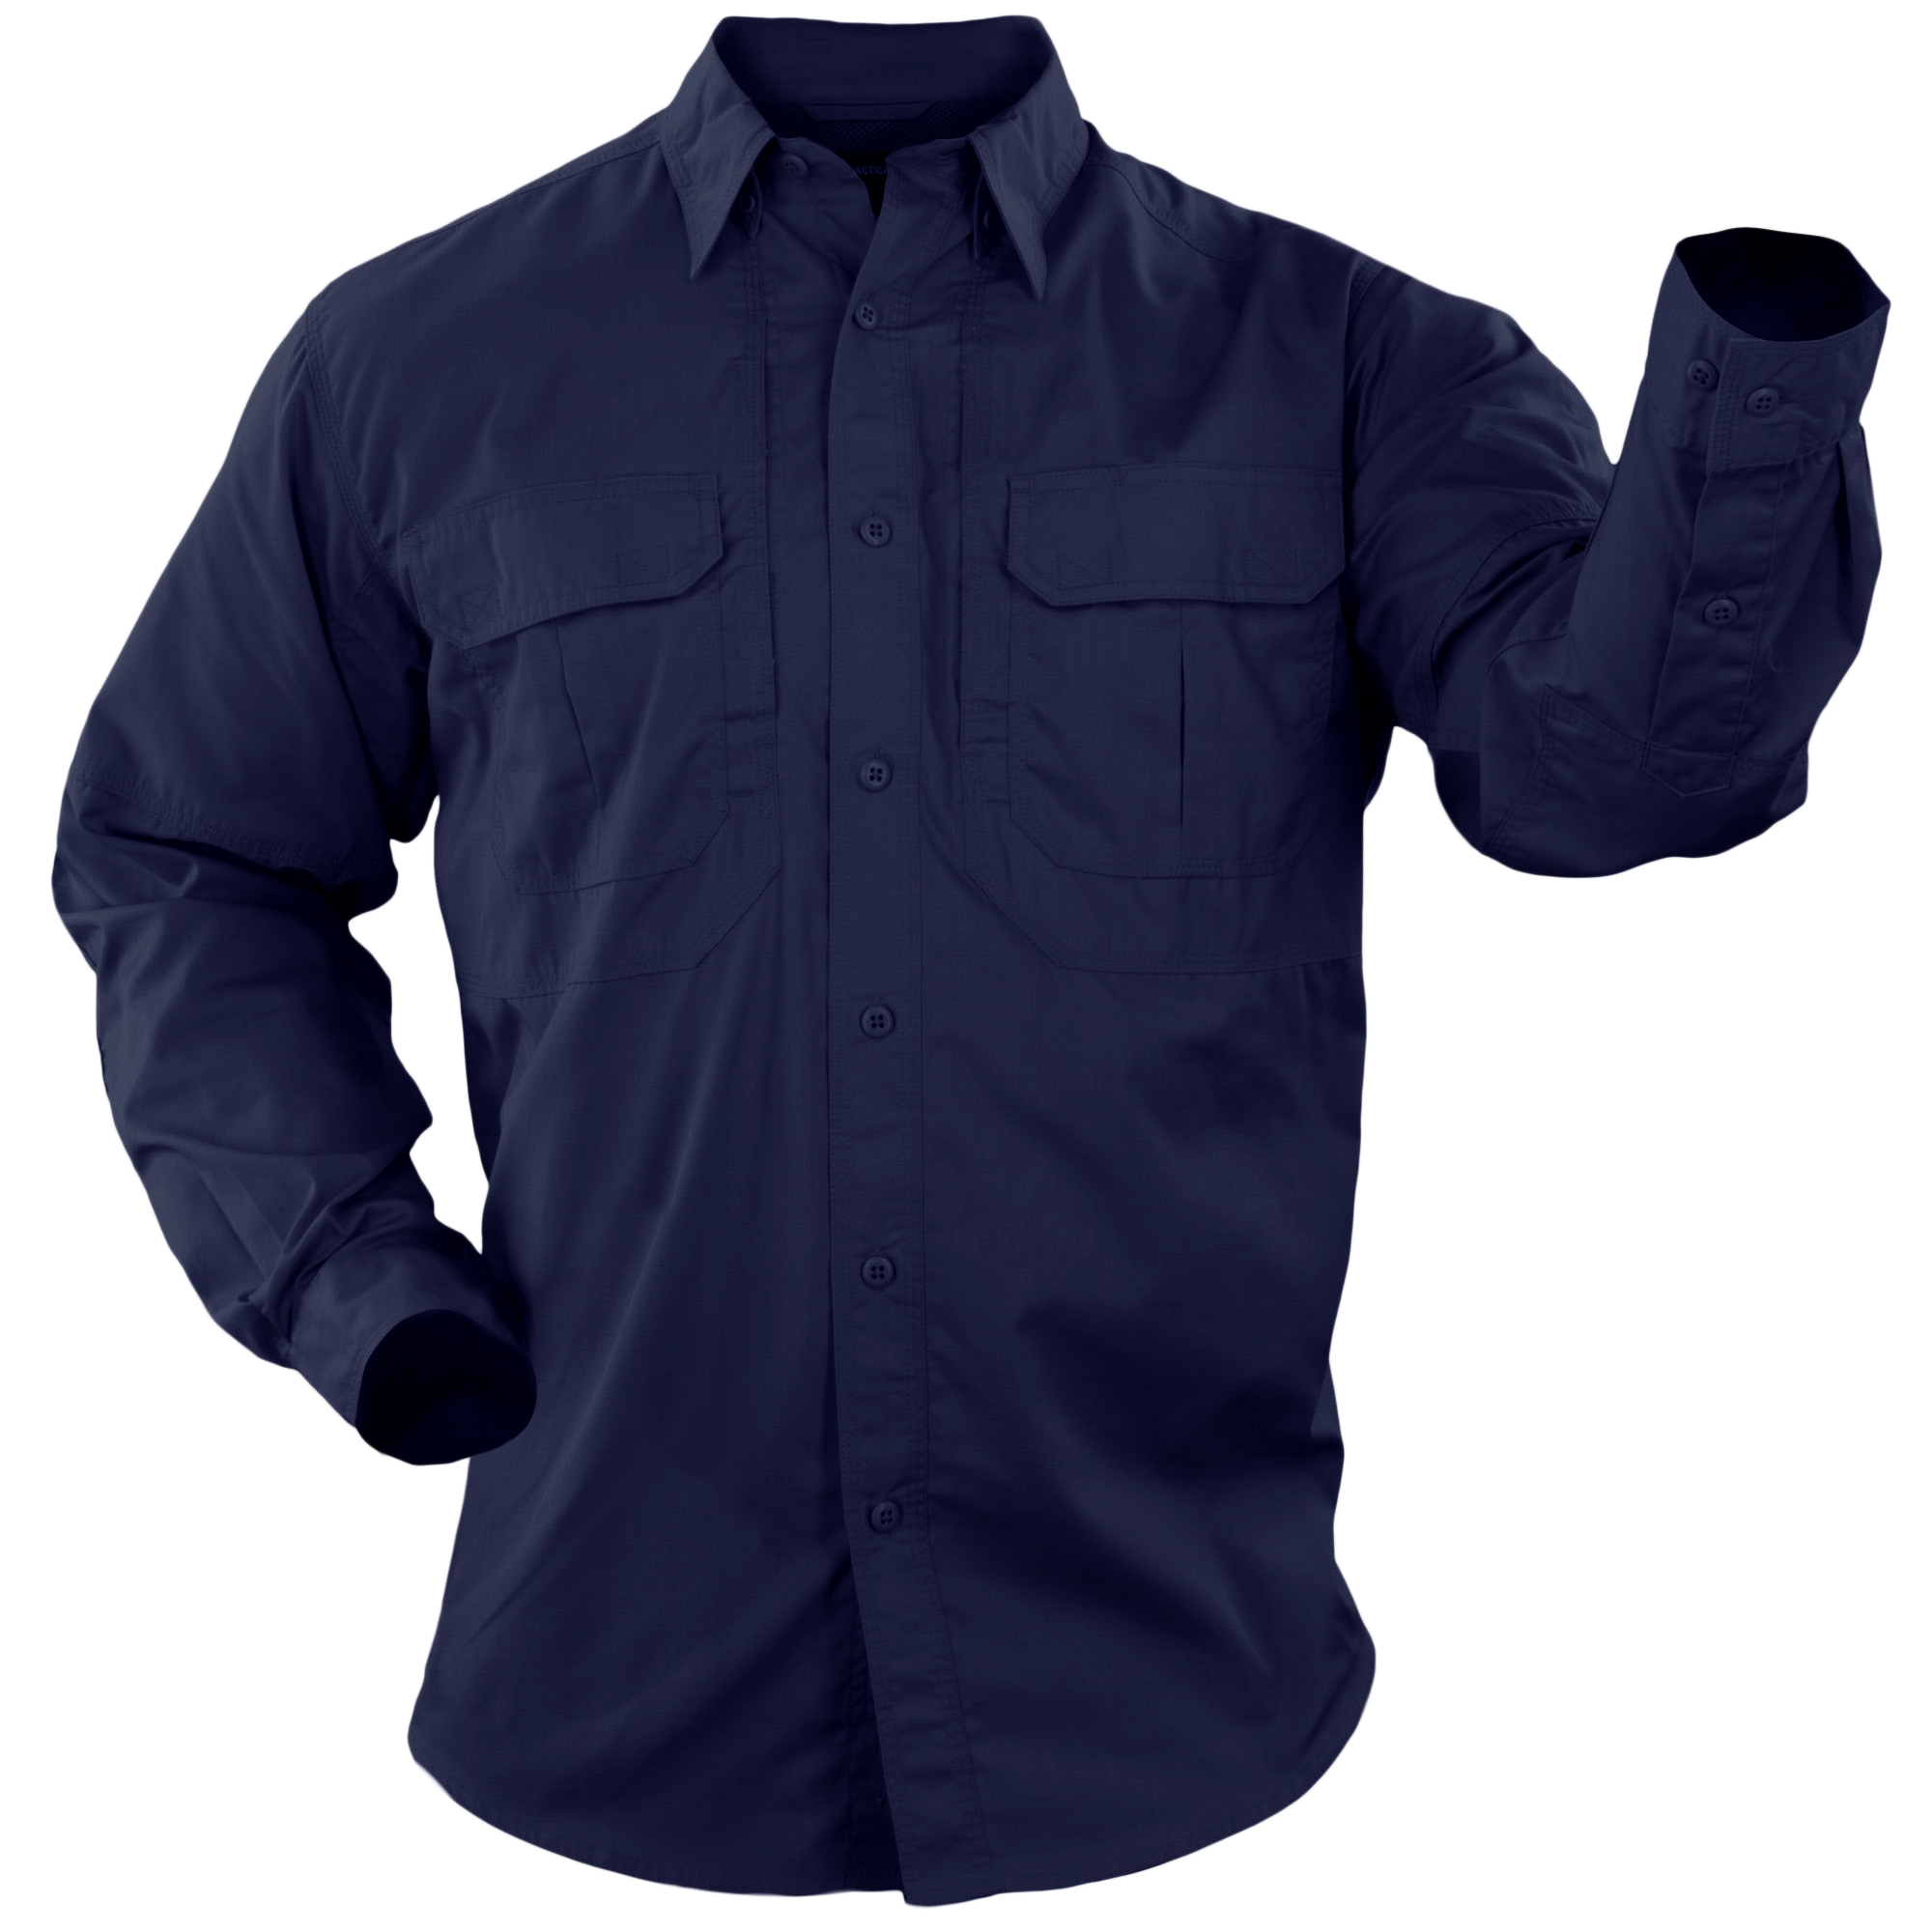 Style 72175 5.11 Tactical Taclite Professional Long-Sleeve Button-Up Work Shirt